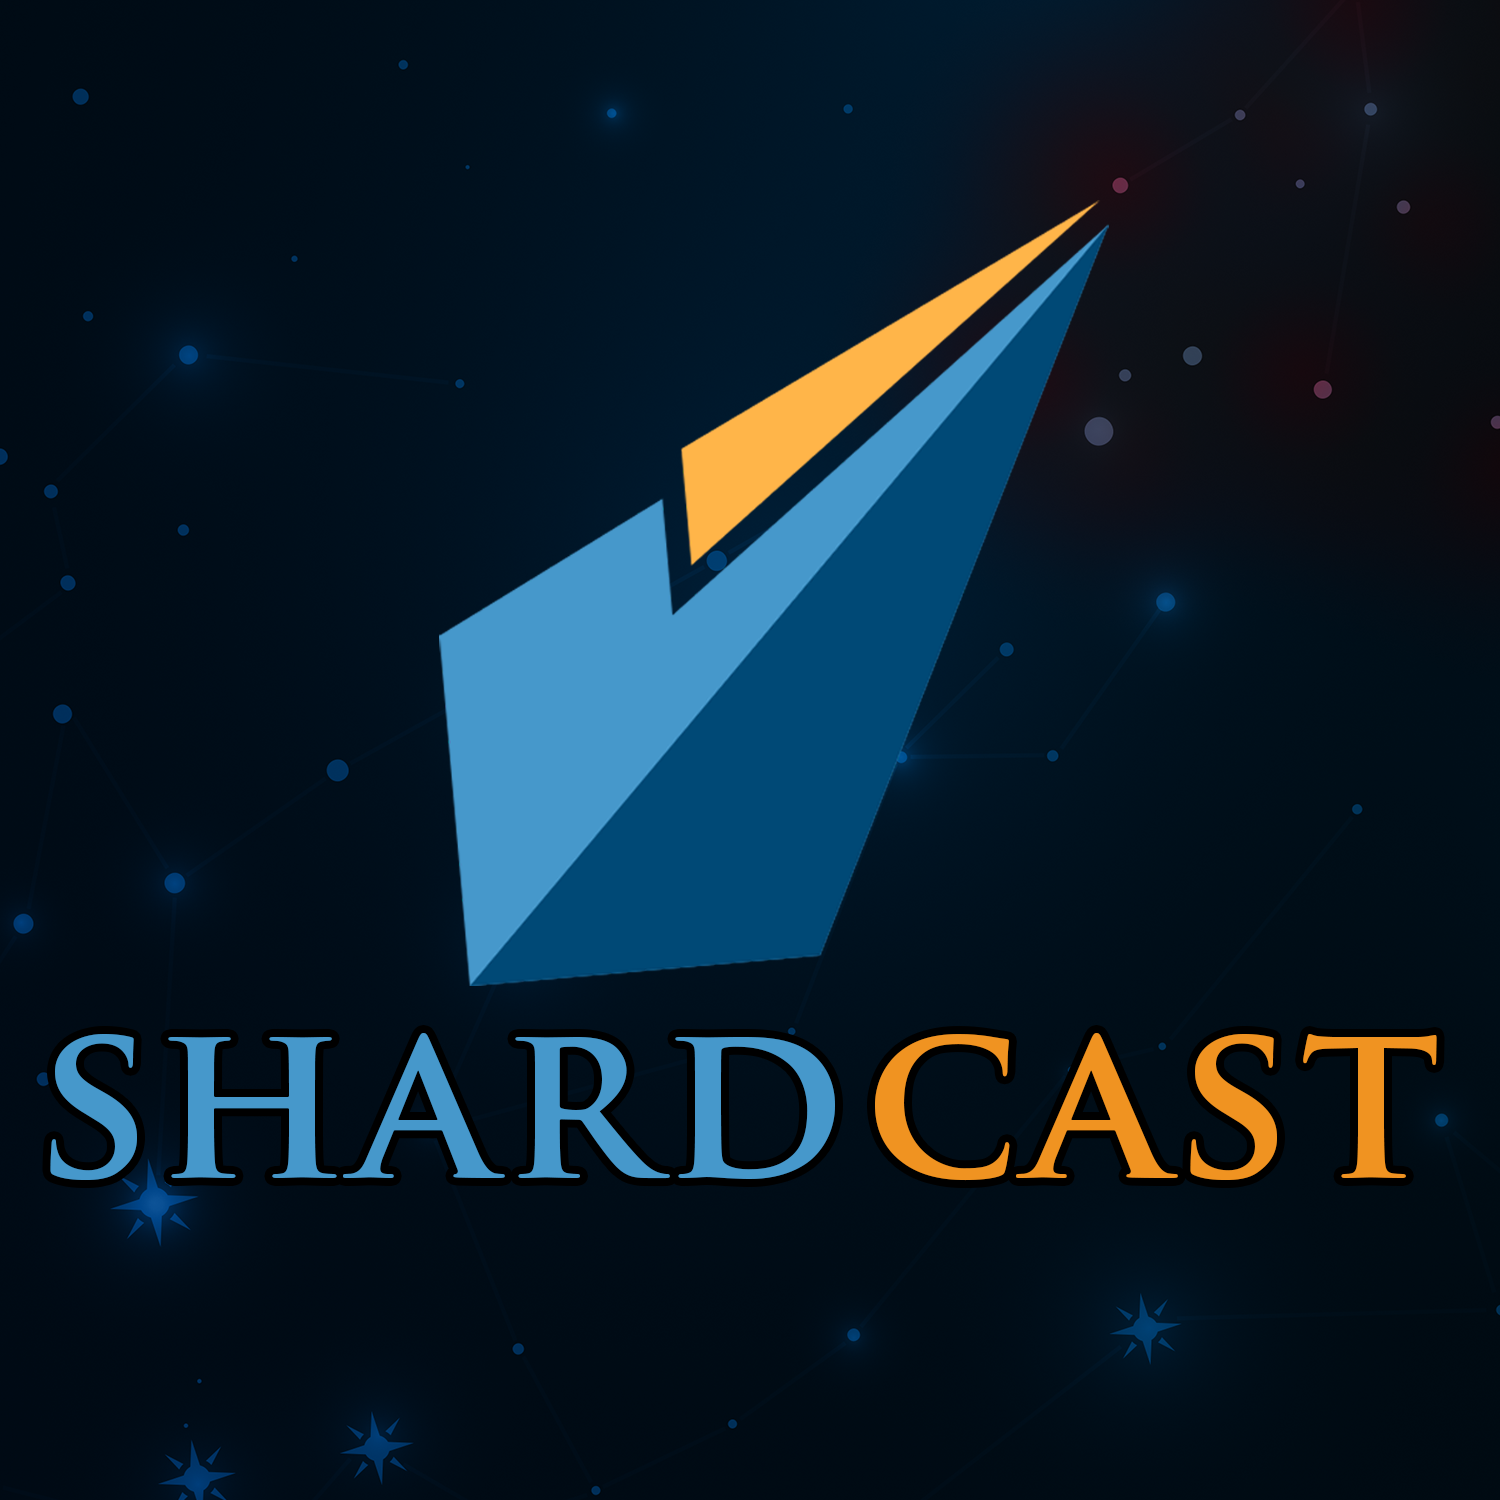 More information about "Shardcast: The Sunlit Man Reactions & Implications"